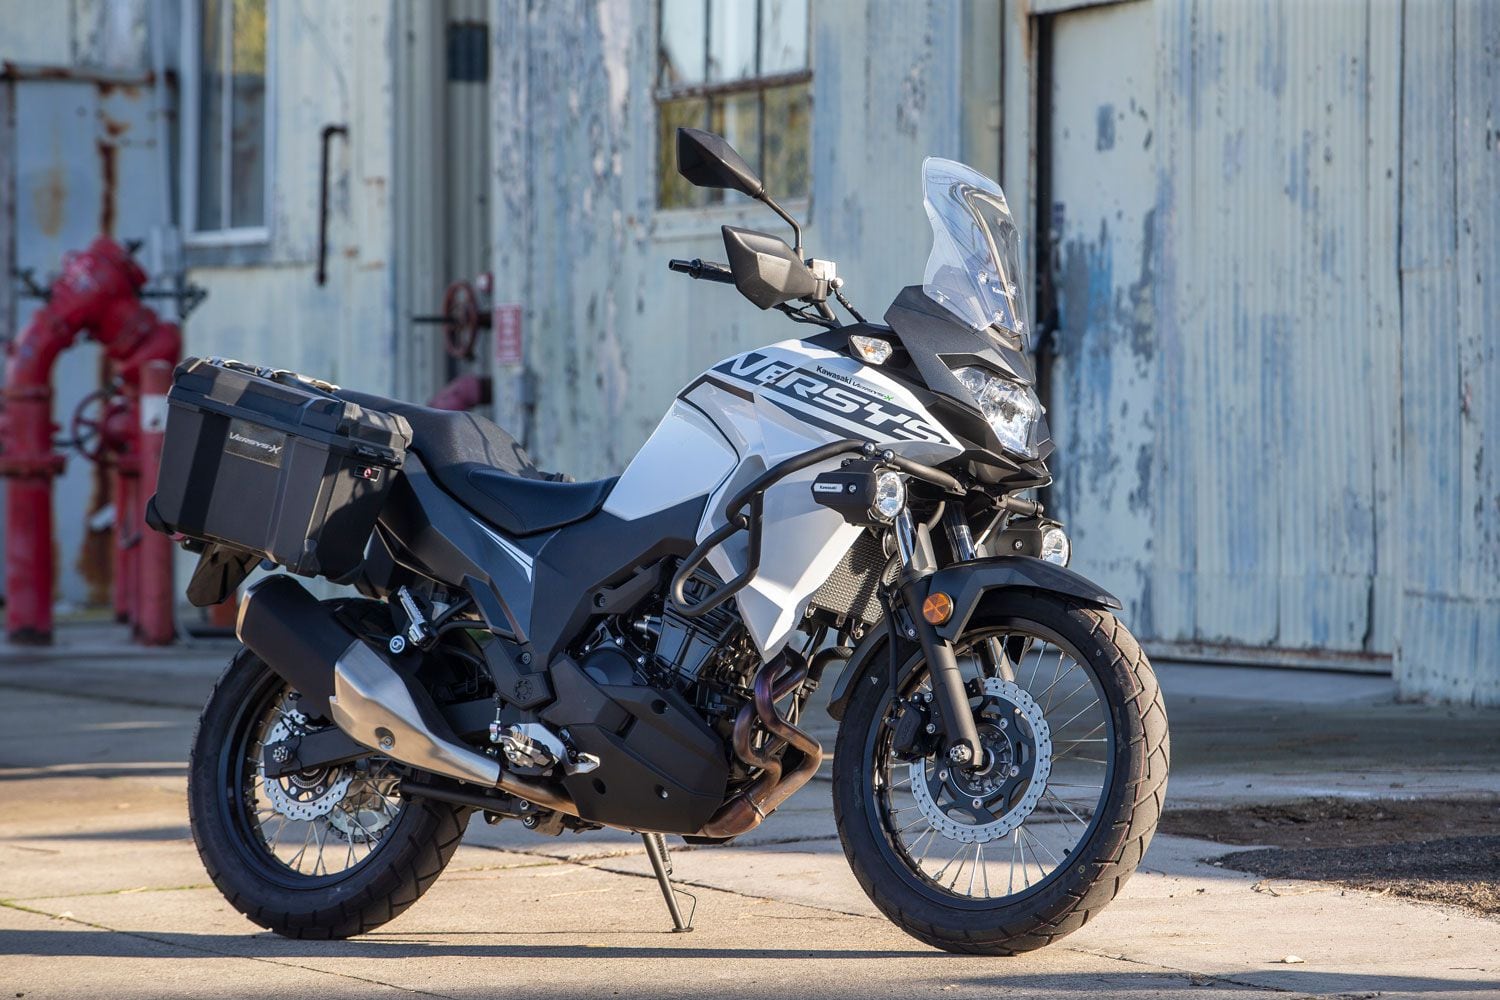 With a low MSRP, the Versys invites riders to look into OEM or aftermarket catalogs.